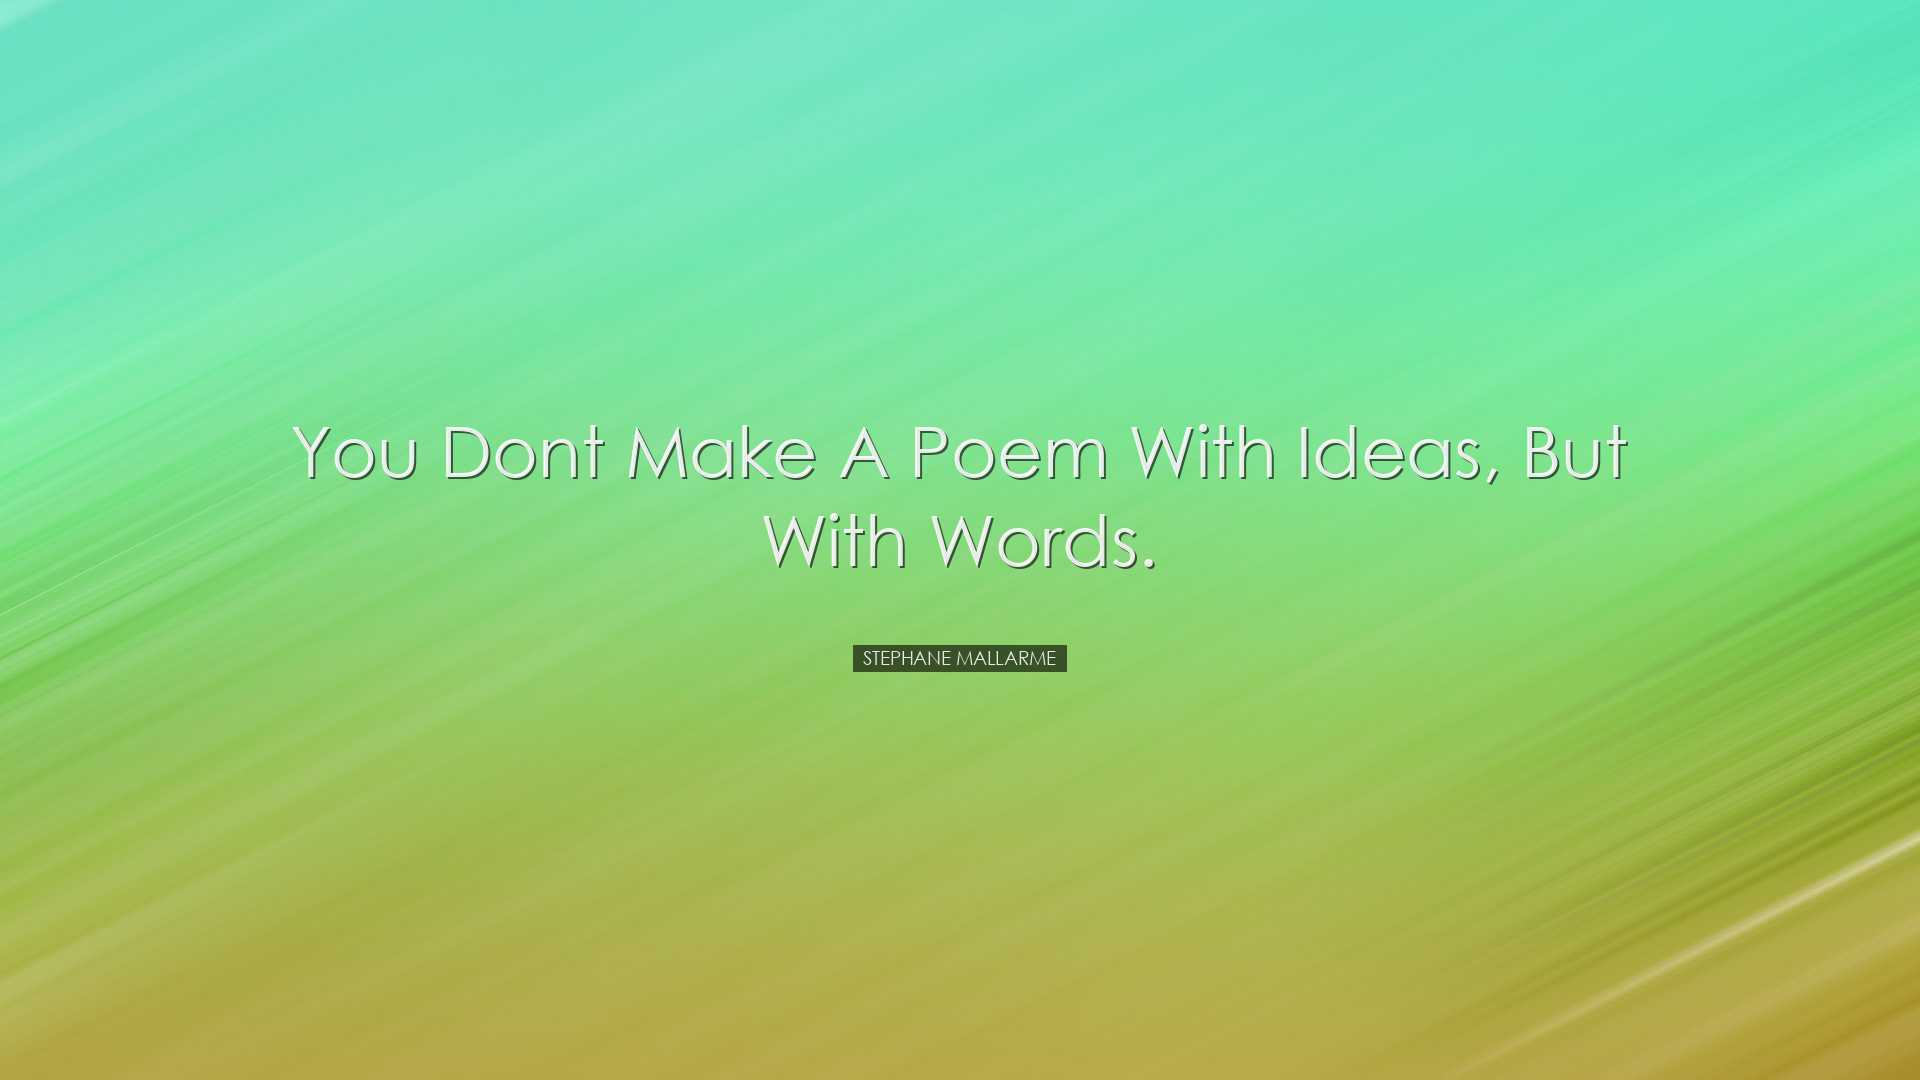 You dont make a poem with ideas, but with words. - Stephane Mallar